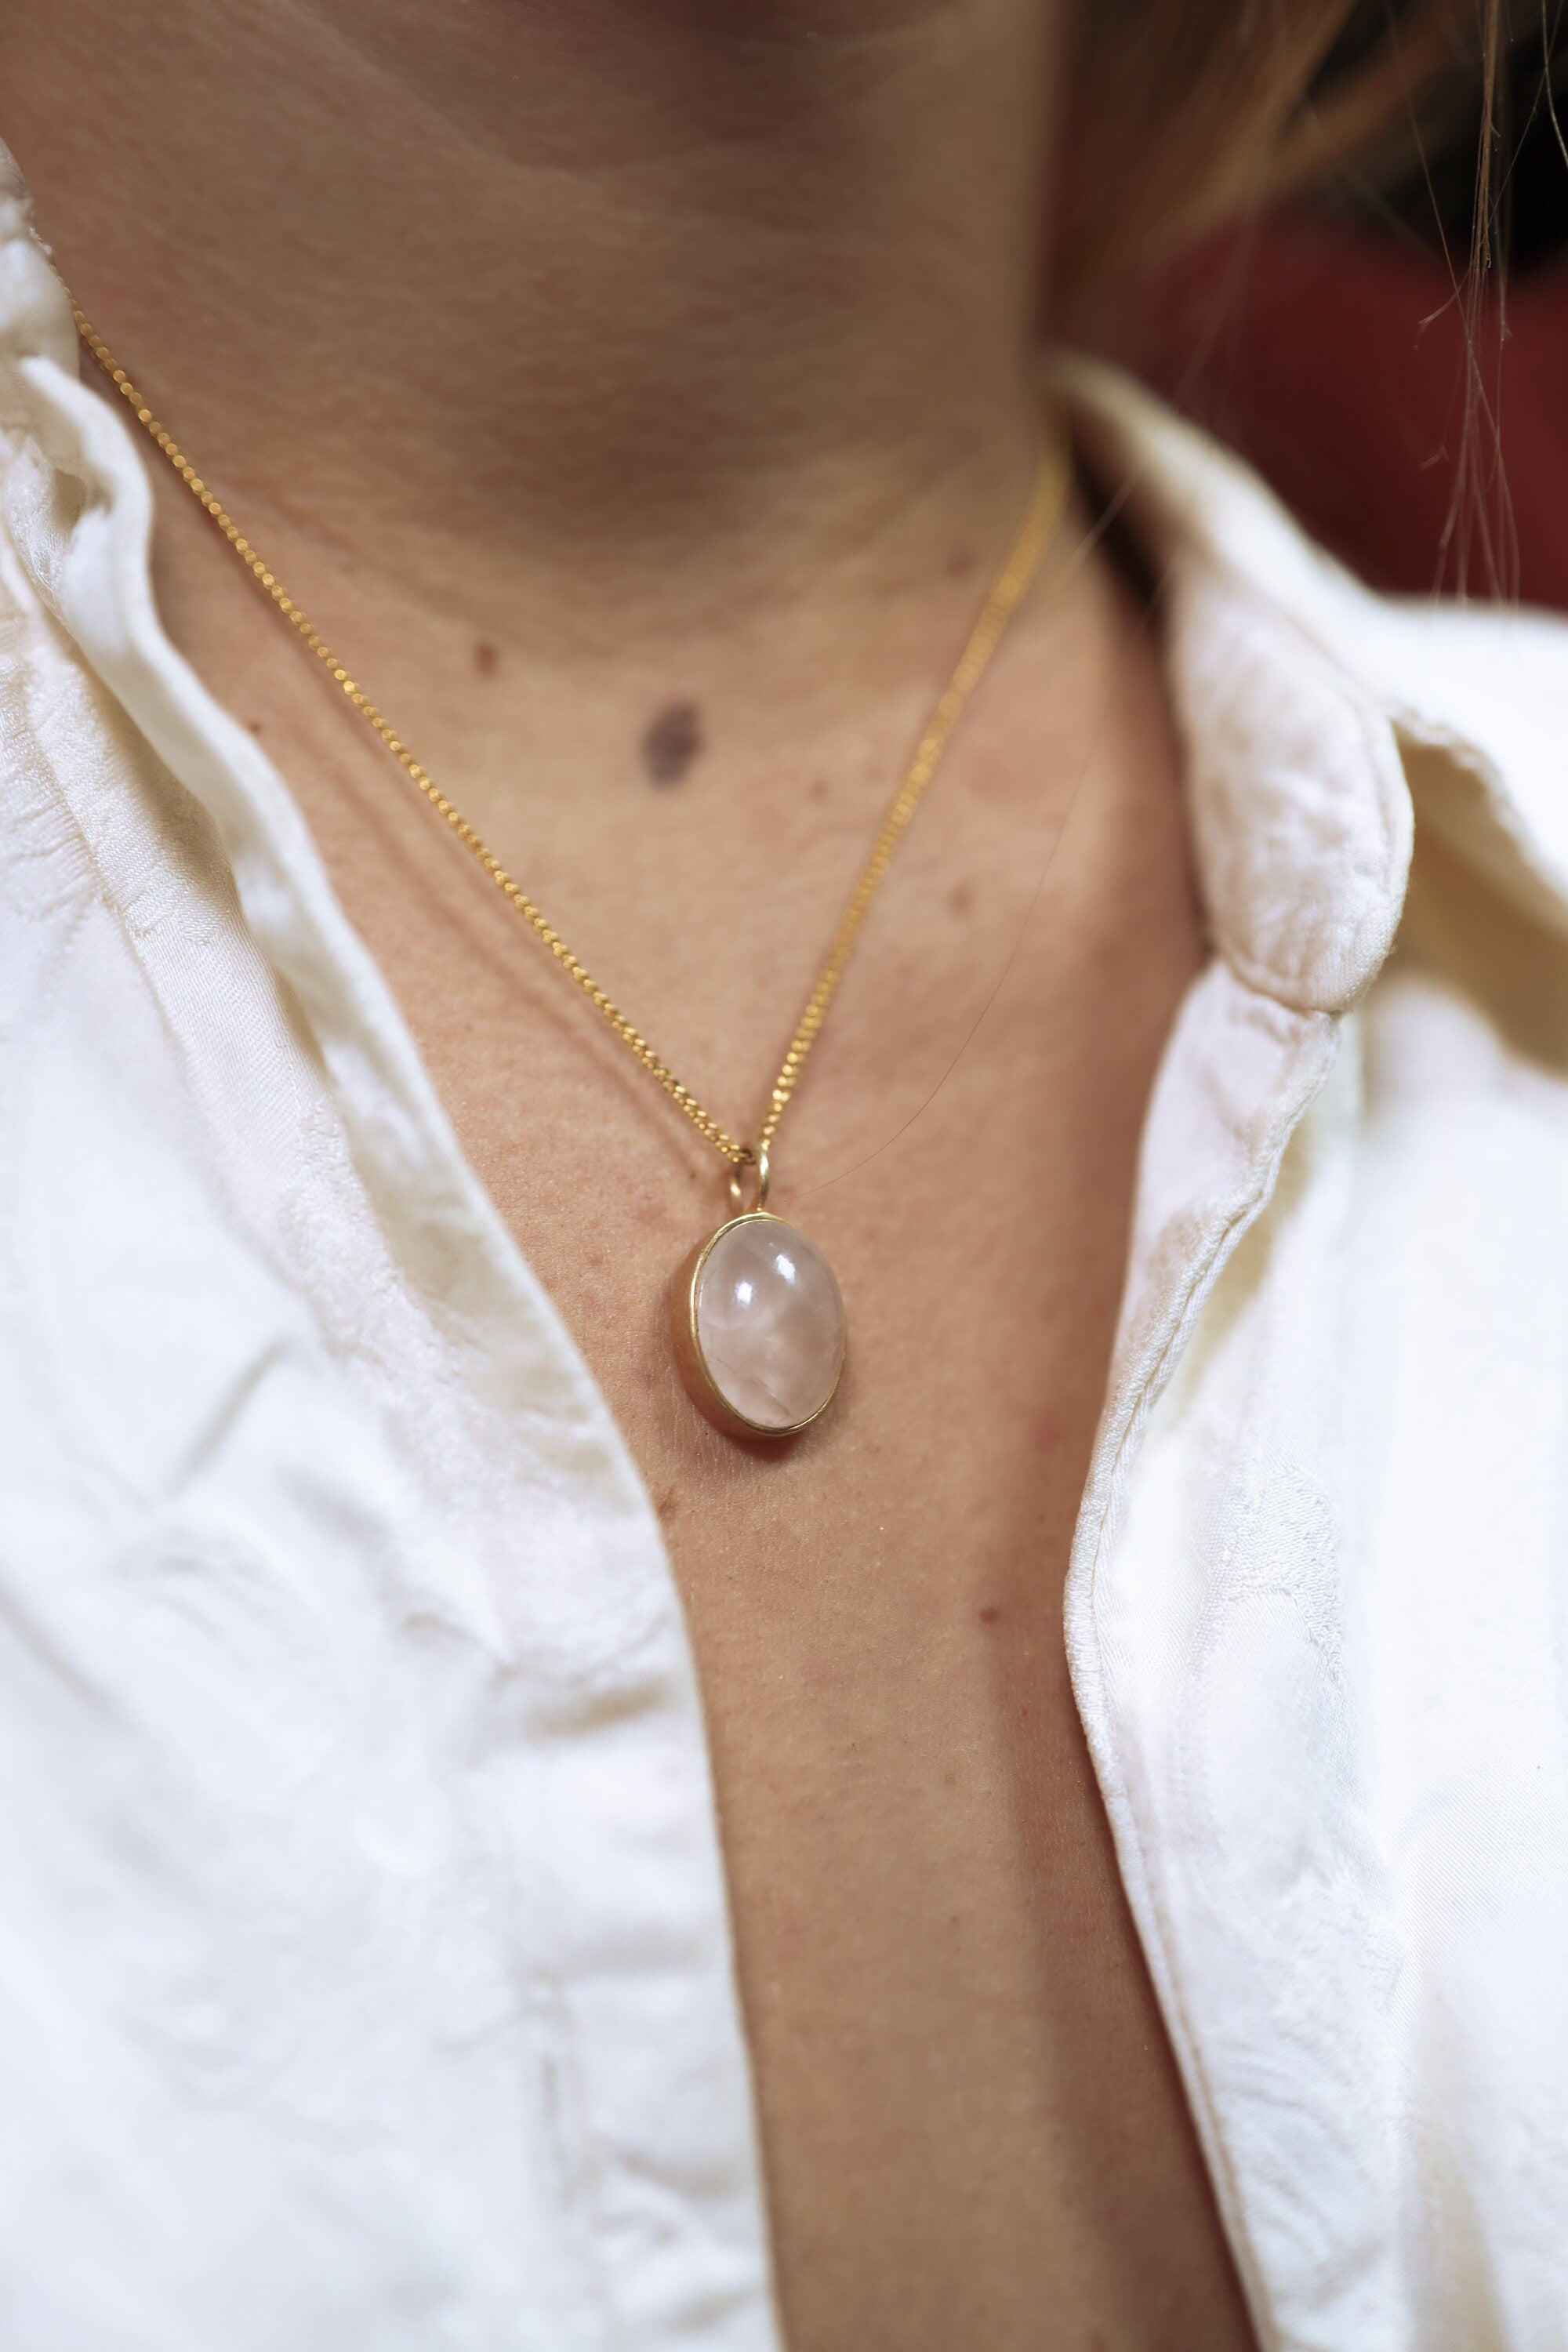 One AAA Oval Shaped Rose Quartz - Crystal Pendant Necklace - Gold Plated 925 Sterling Silver - Rustic hammer textured finish